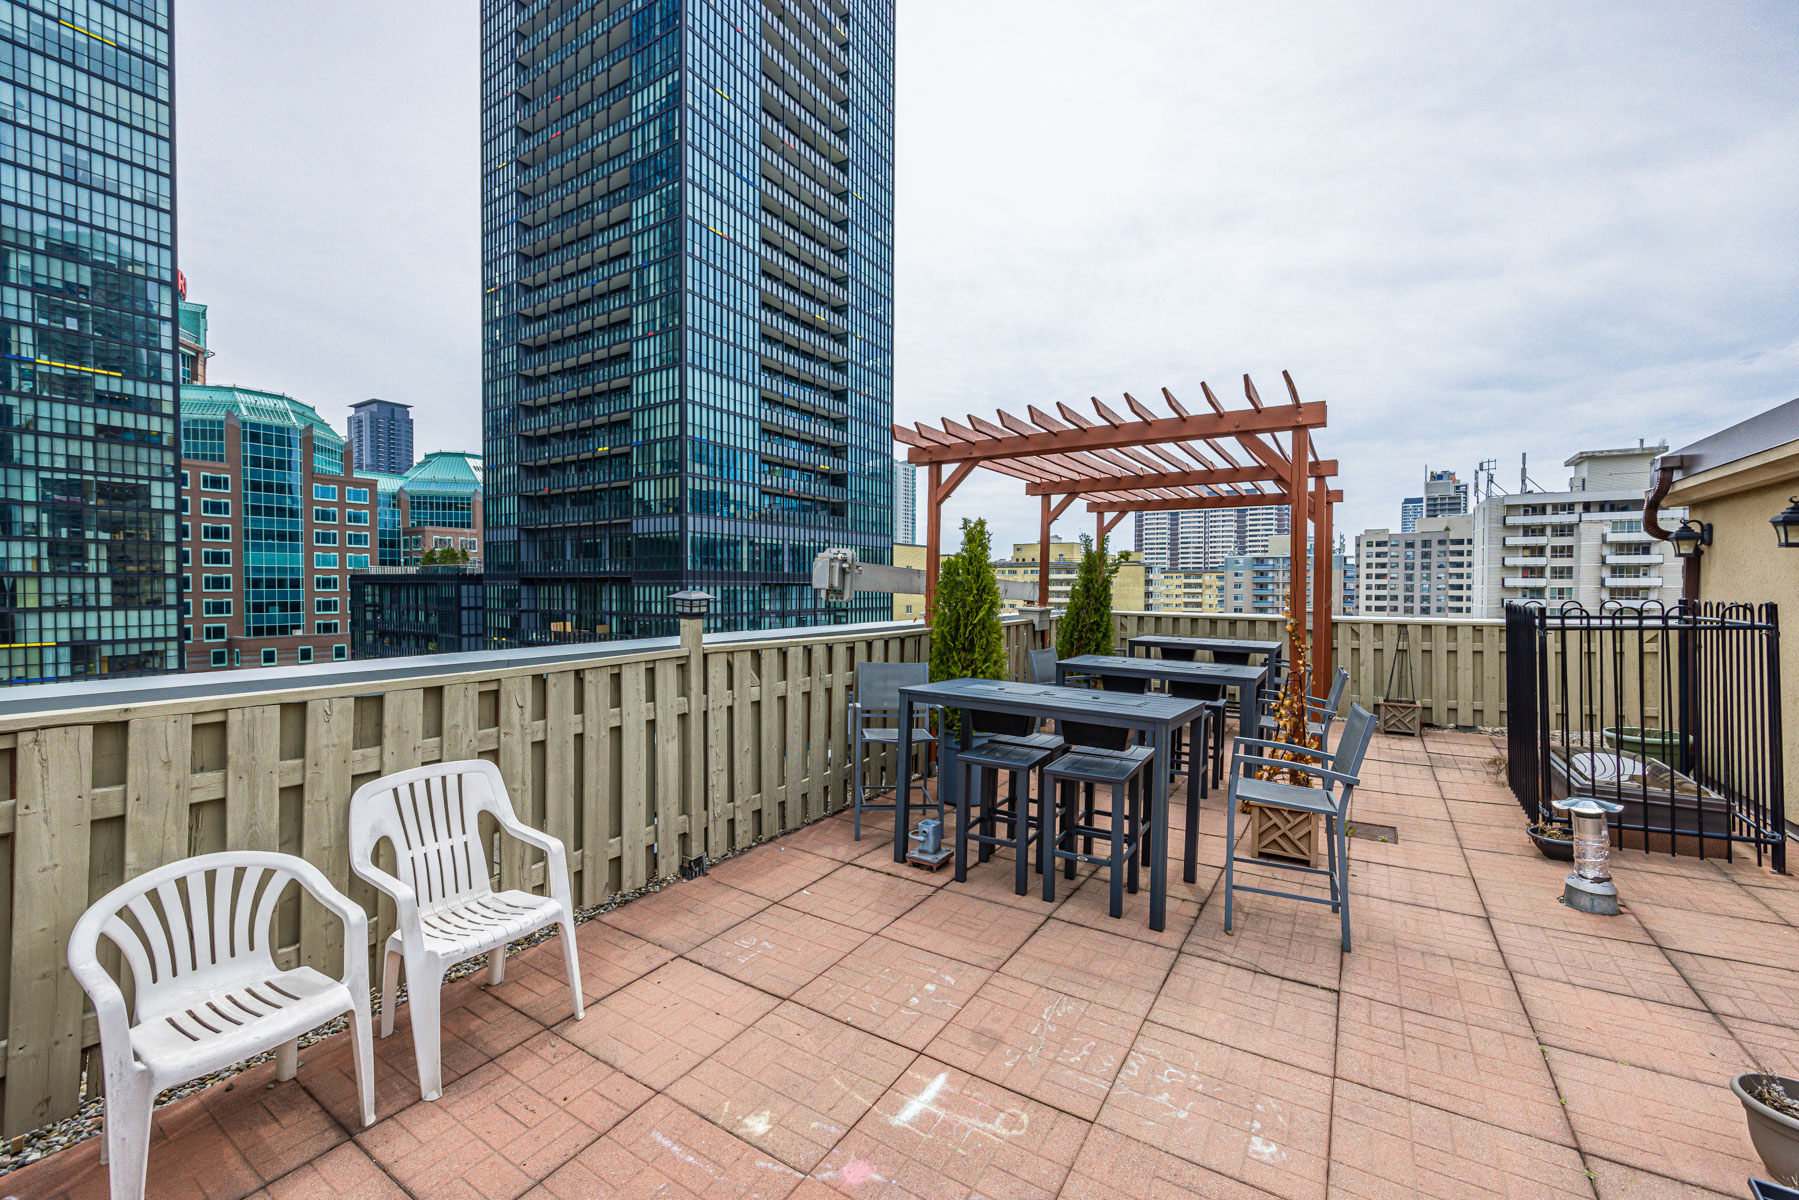 Condo rooftop deck with chairs and community garden – Waldorf Astoria Toronto.